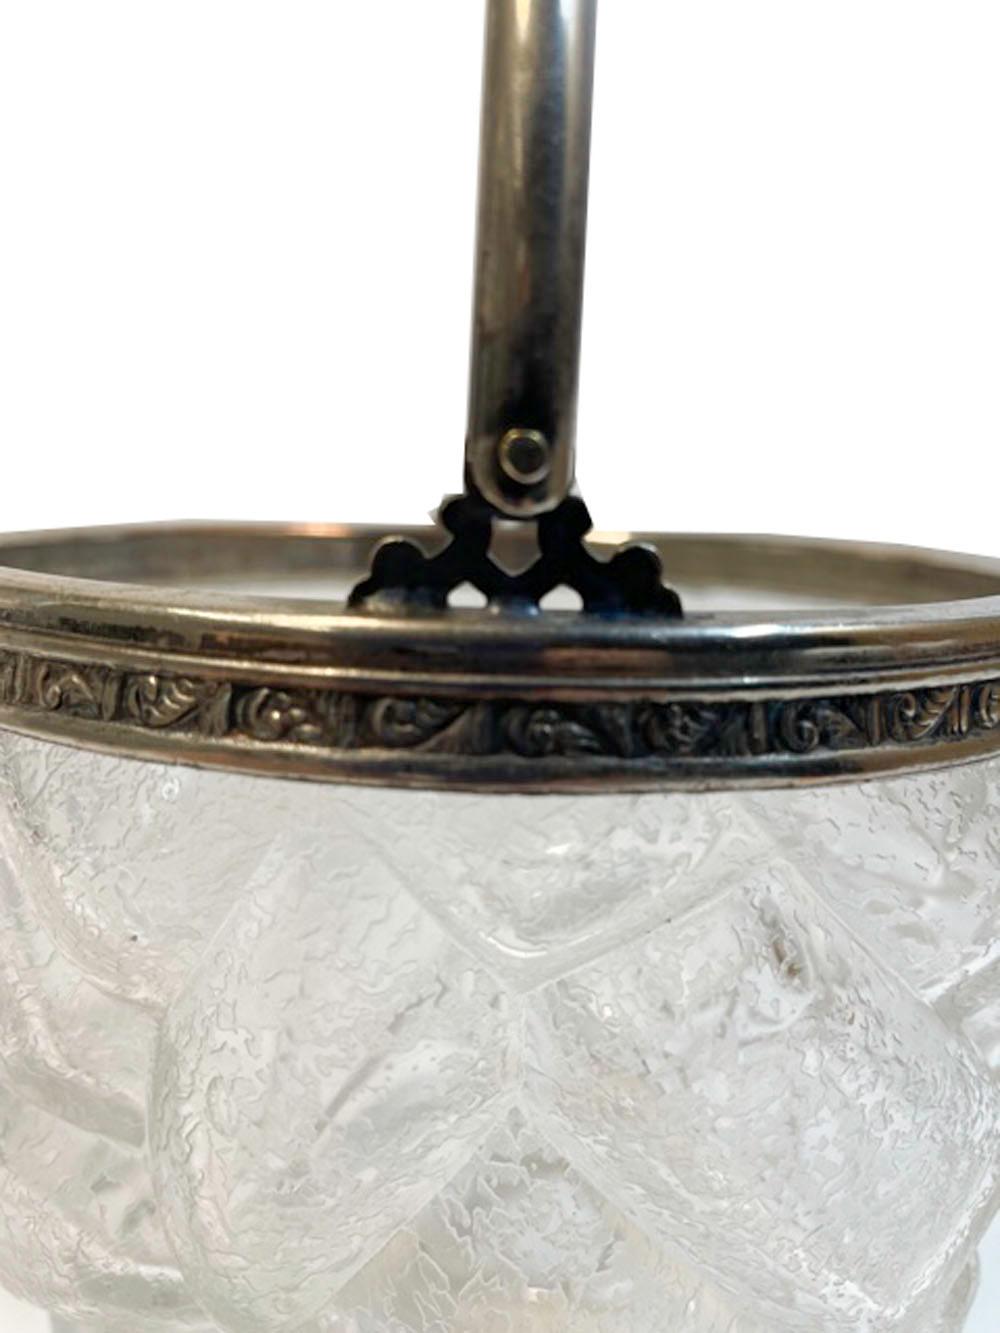 Art Deco Cracked Ice Molded Ice Bucket with Silver Plate Rim and Handle In Good Condition For Sale In Nantucket, MA